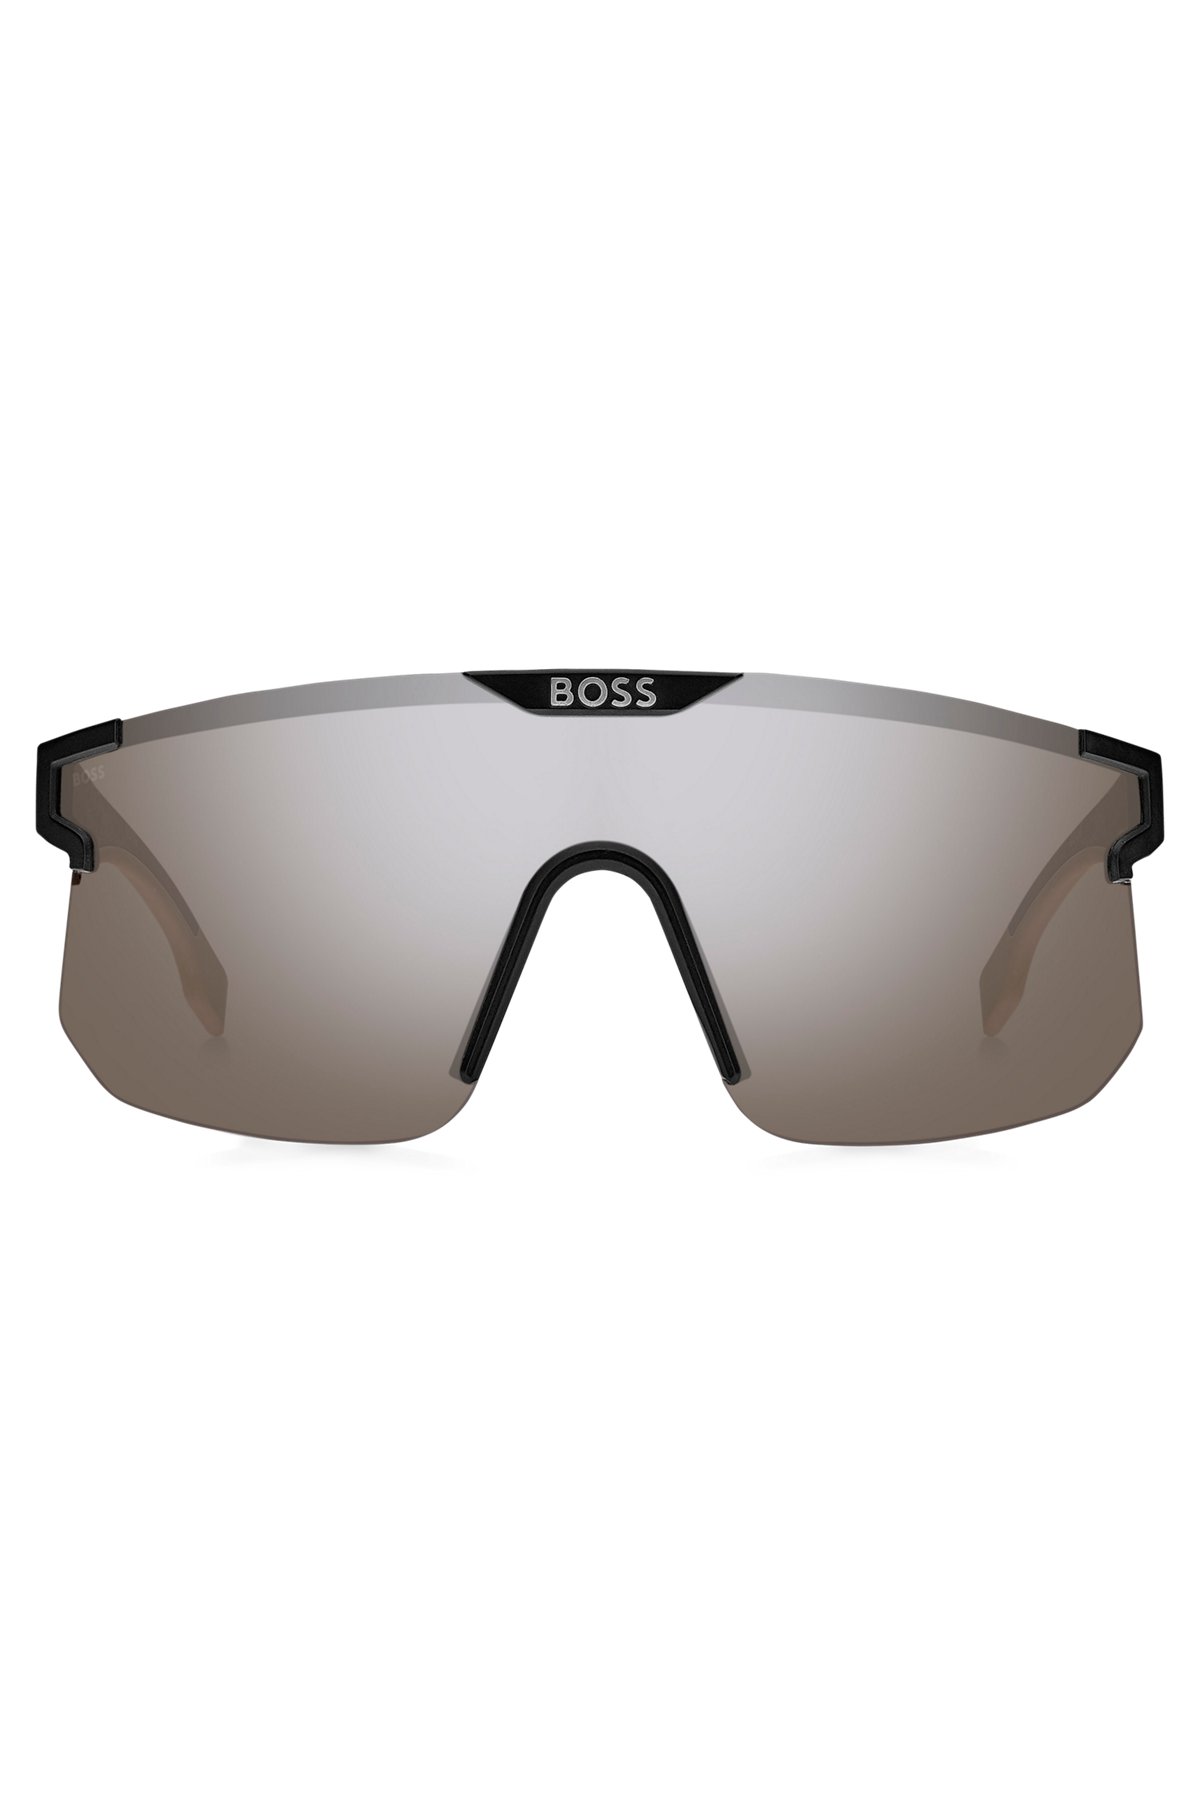 Black mask-style sunglasses with branded temples and bridge, Black